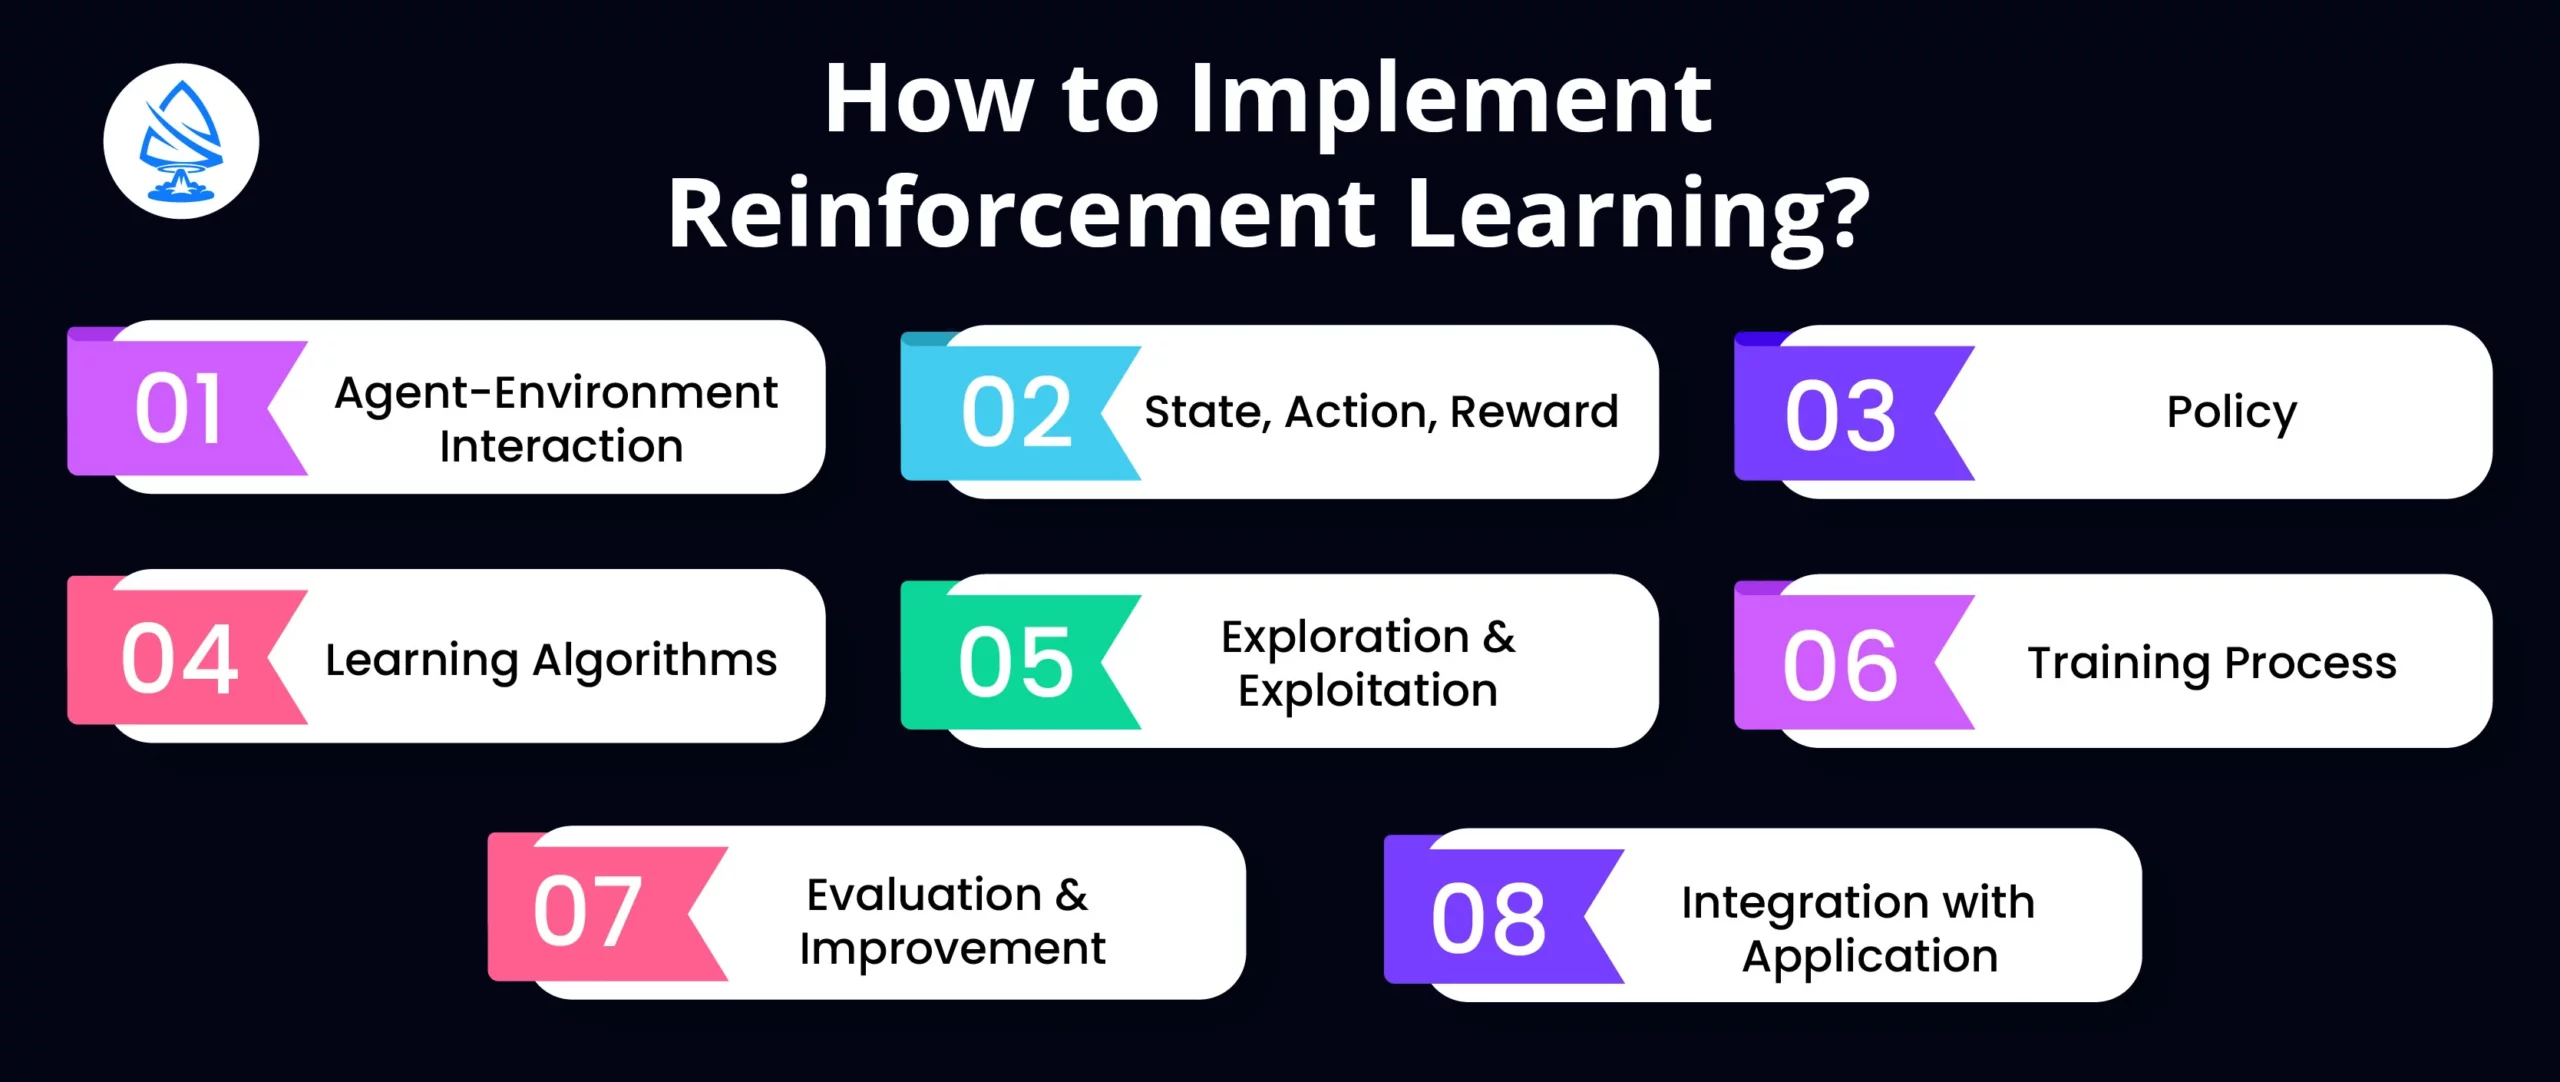 Implementing Reinforcement Learning